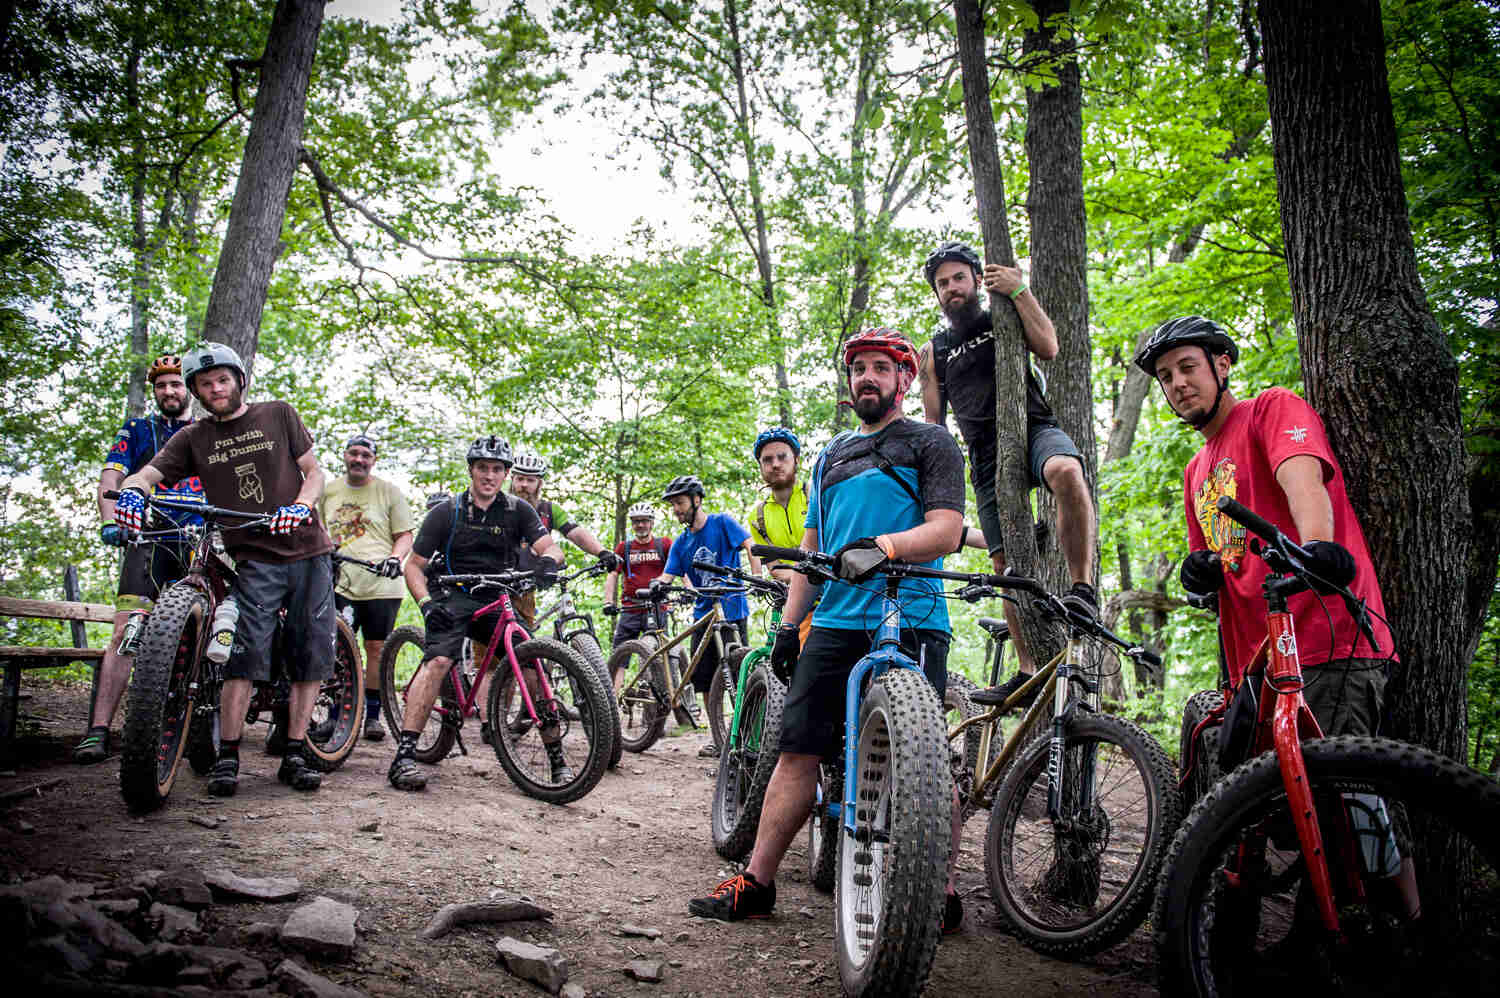 A group of cyclists, standing with their Surly fat bikes on a rocky dirt trail in a forest